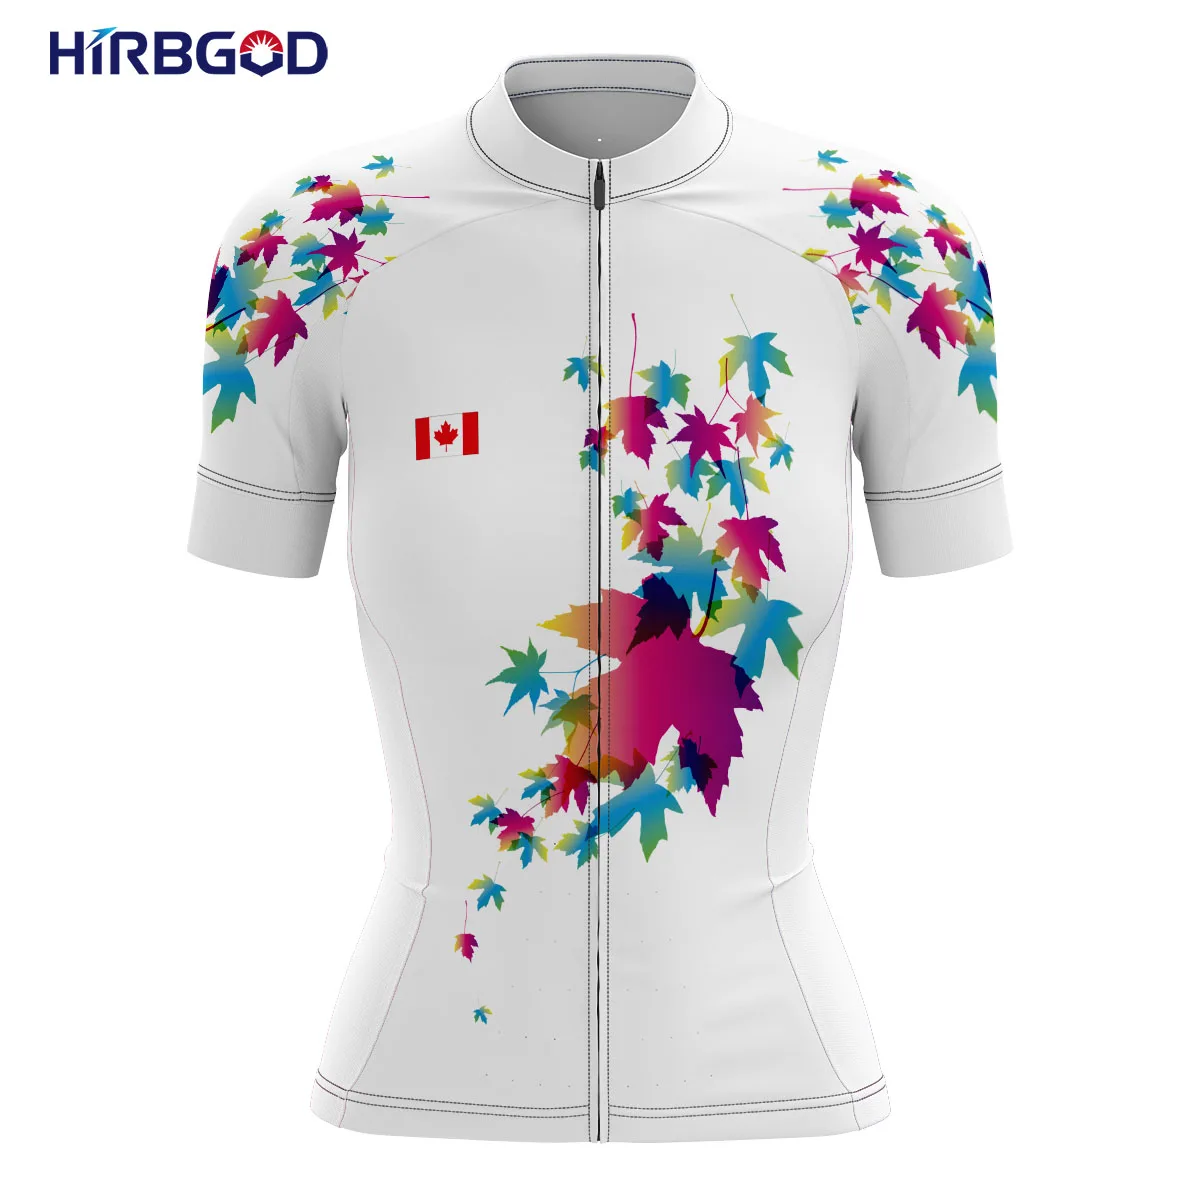 

HIRBGOD New Women's Close-Fitting Tops, Cross-Country Bikes, Short-Sleeved Plants and Flowers, Ladies Cycling Jerseys,TYZ1007-01